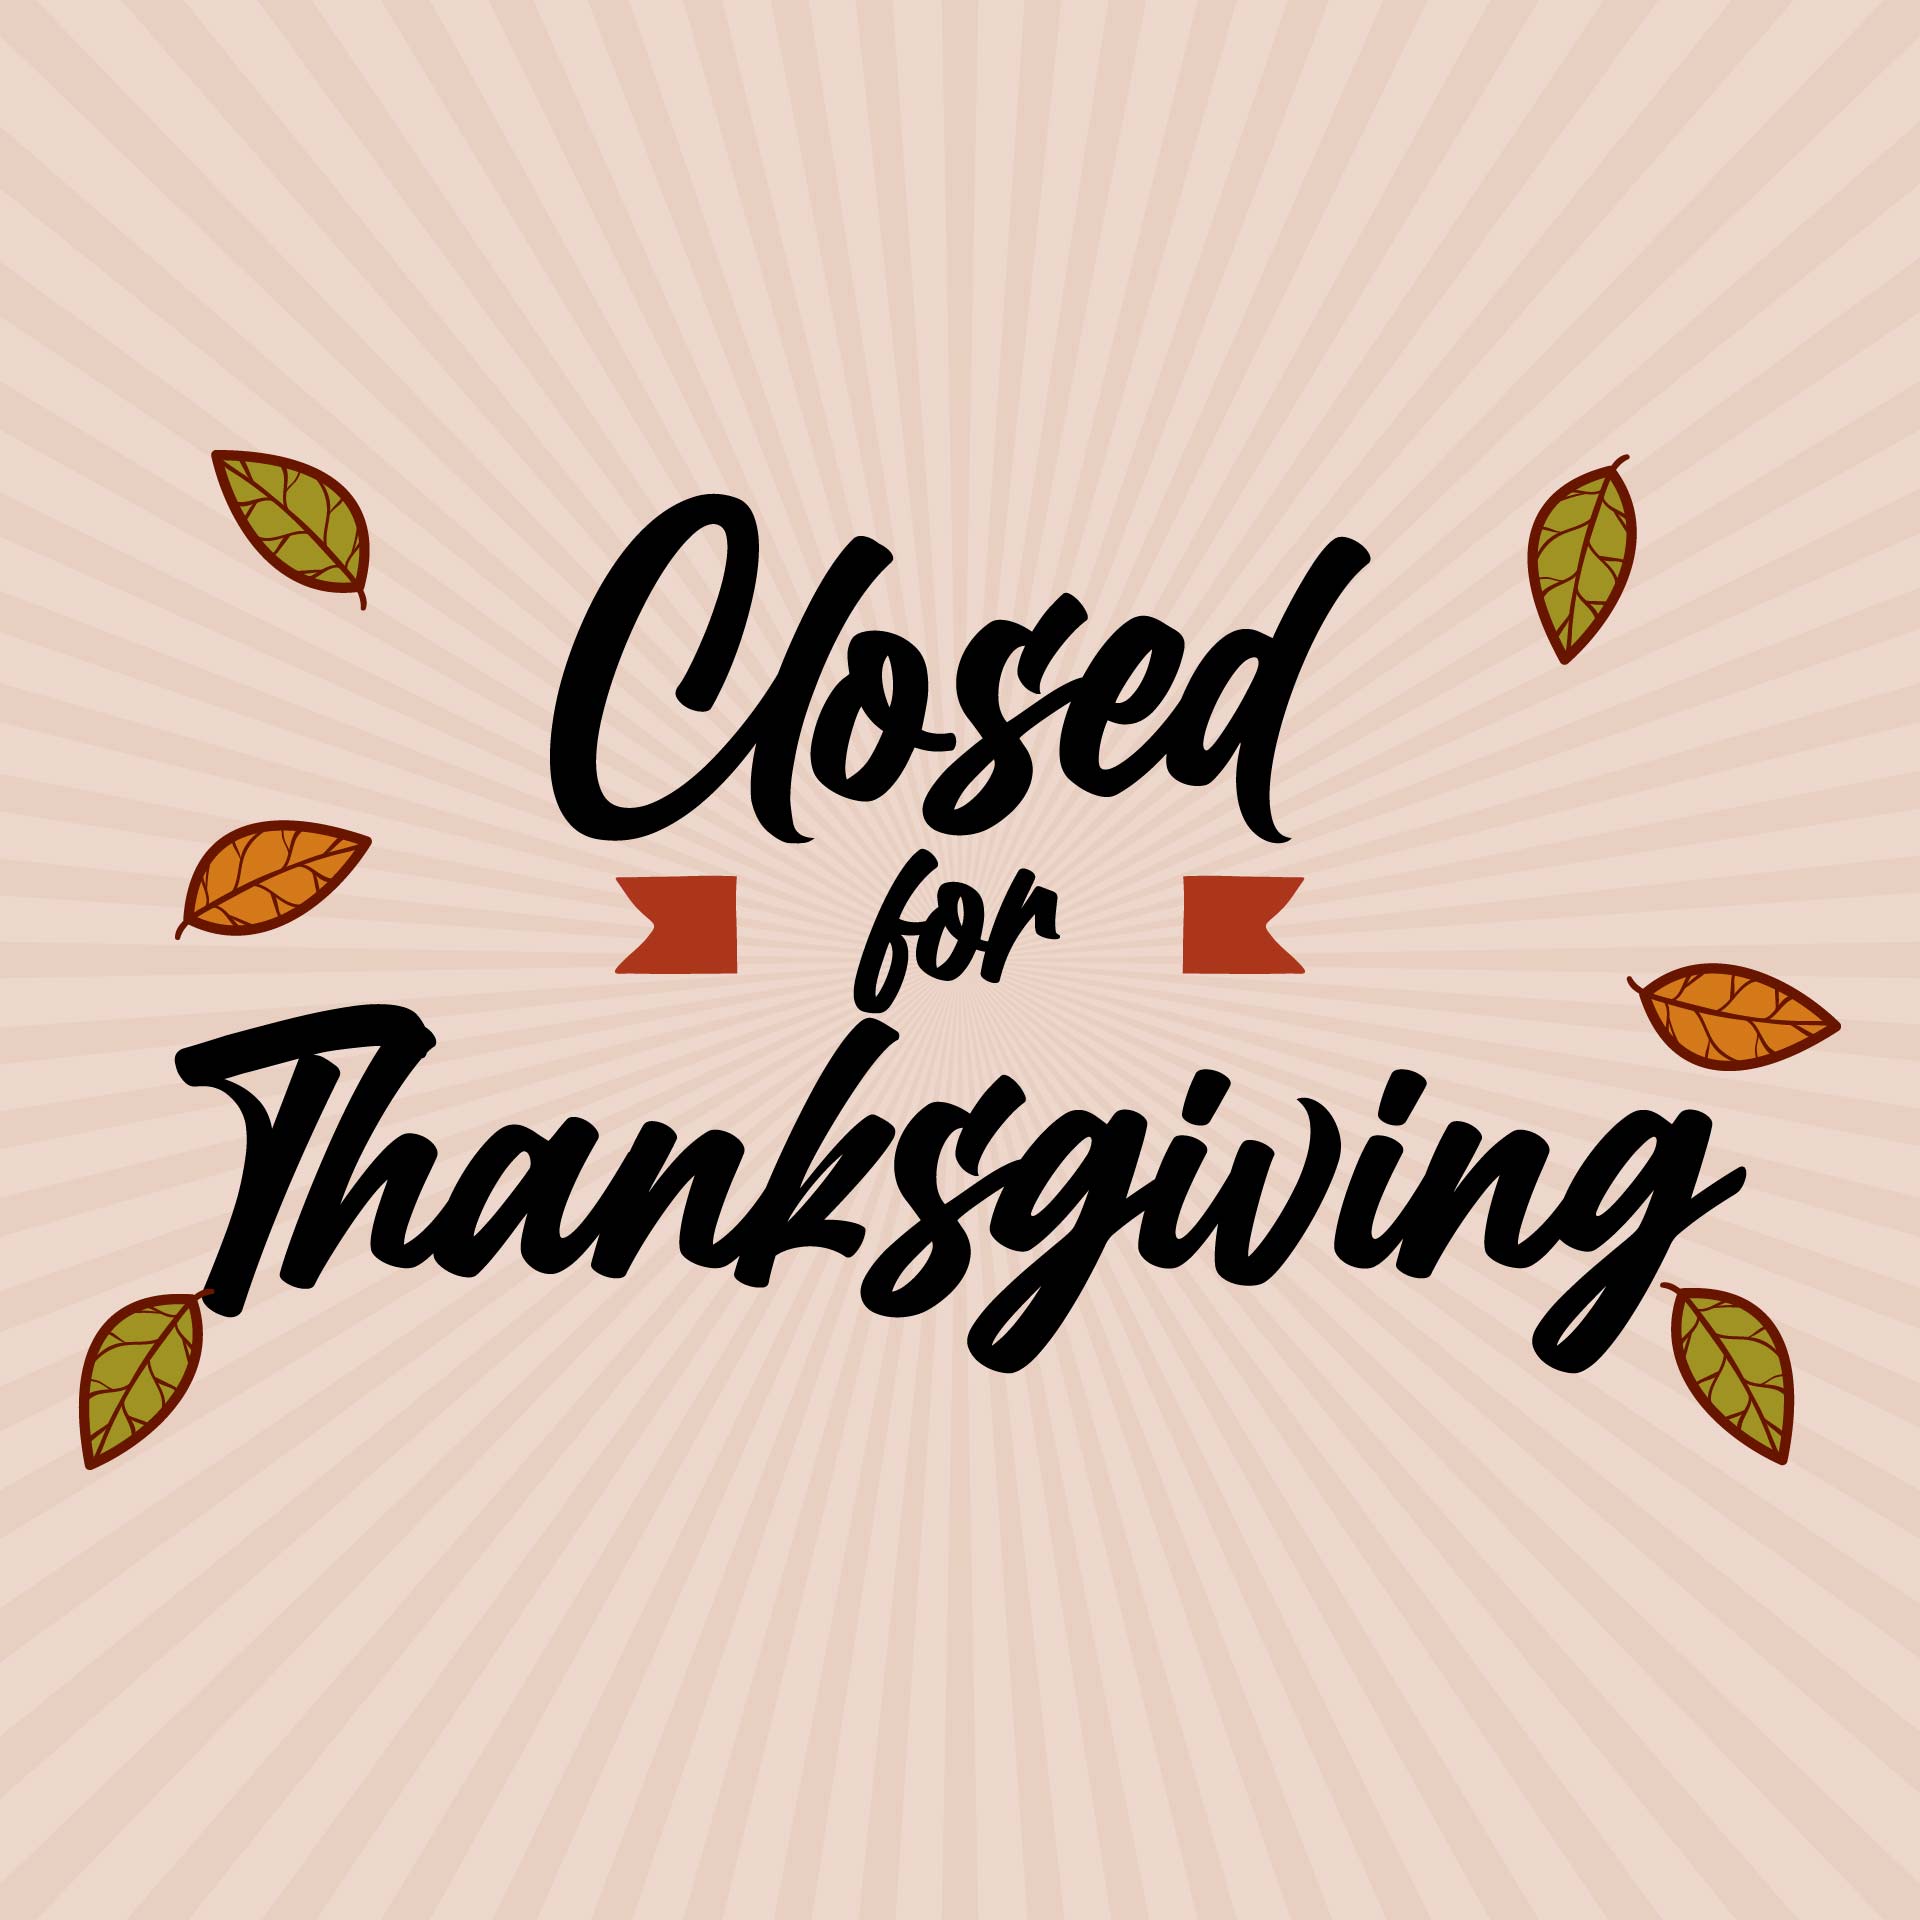 printable-thanksgiving-closed-sign